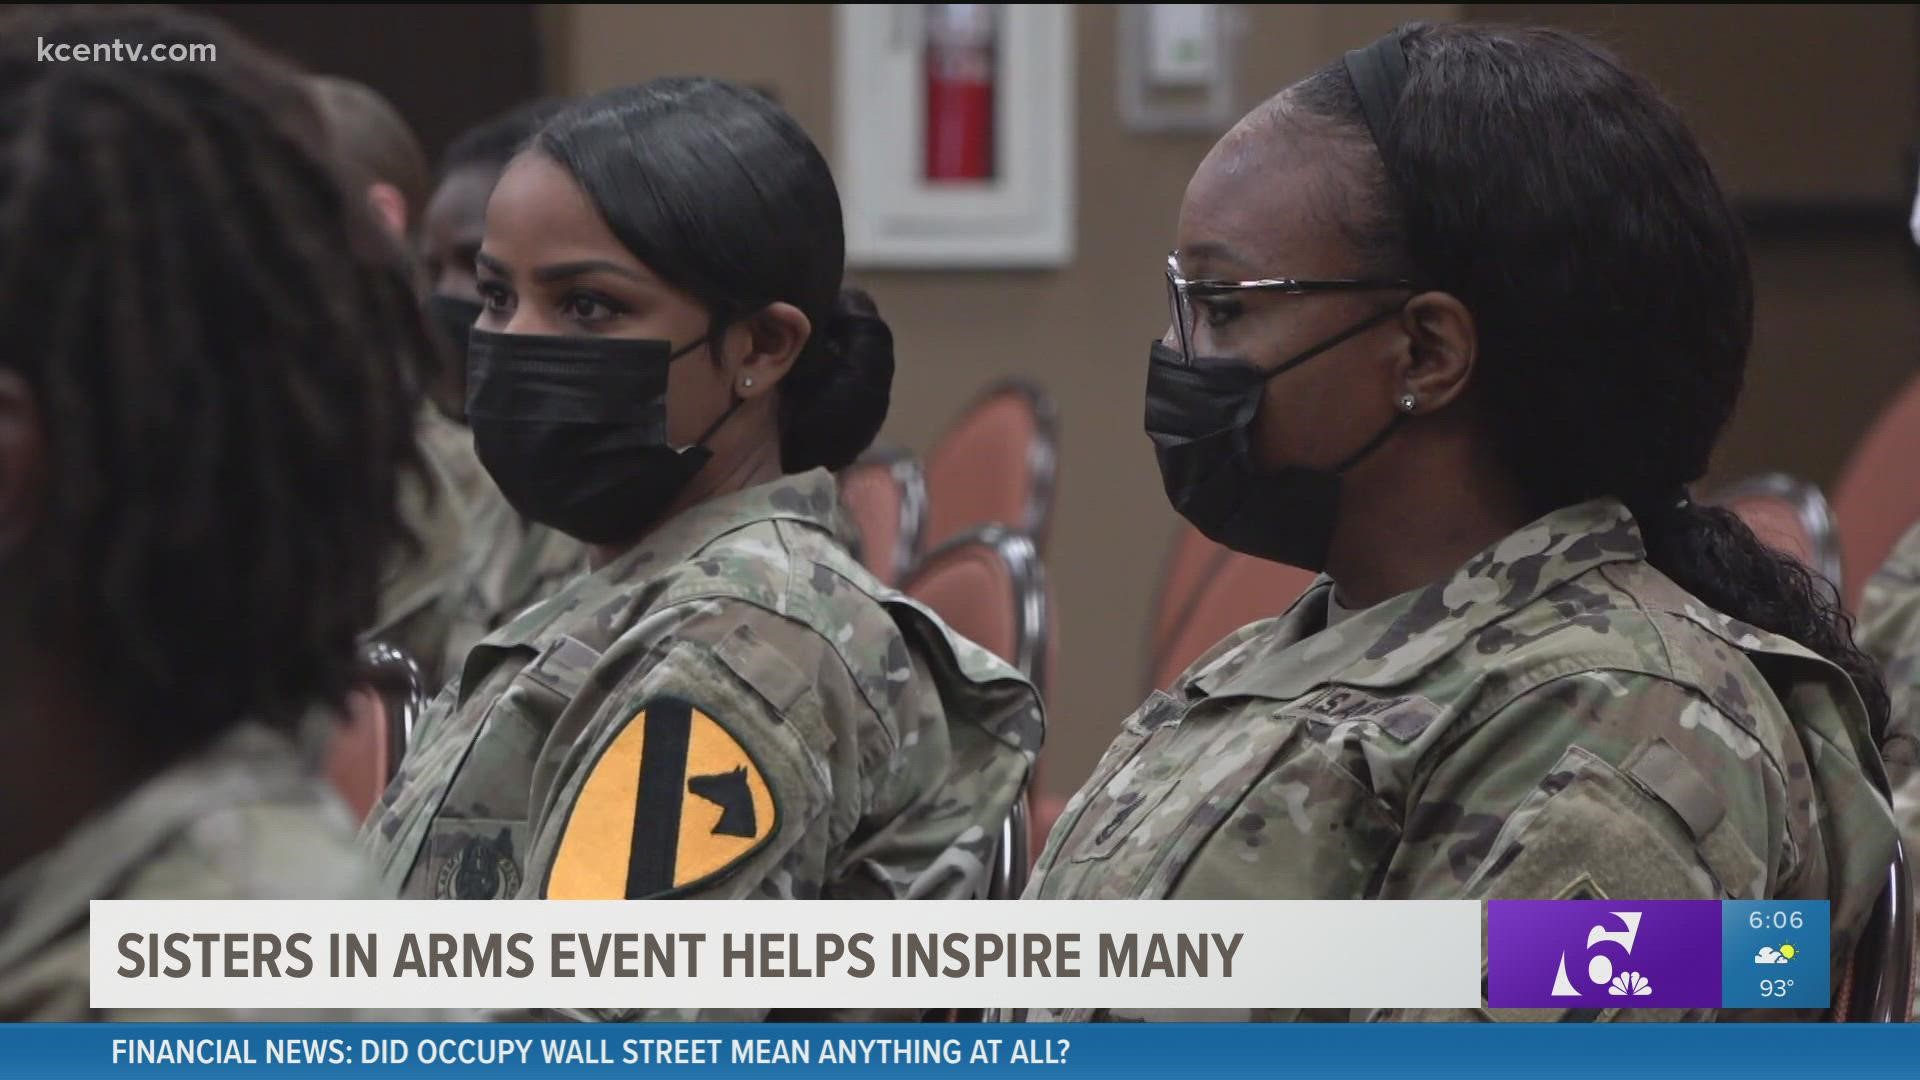 Army leaders took off their uniforms to show they too are real people in hopes of inspiring others.